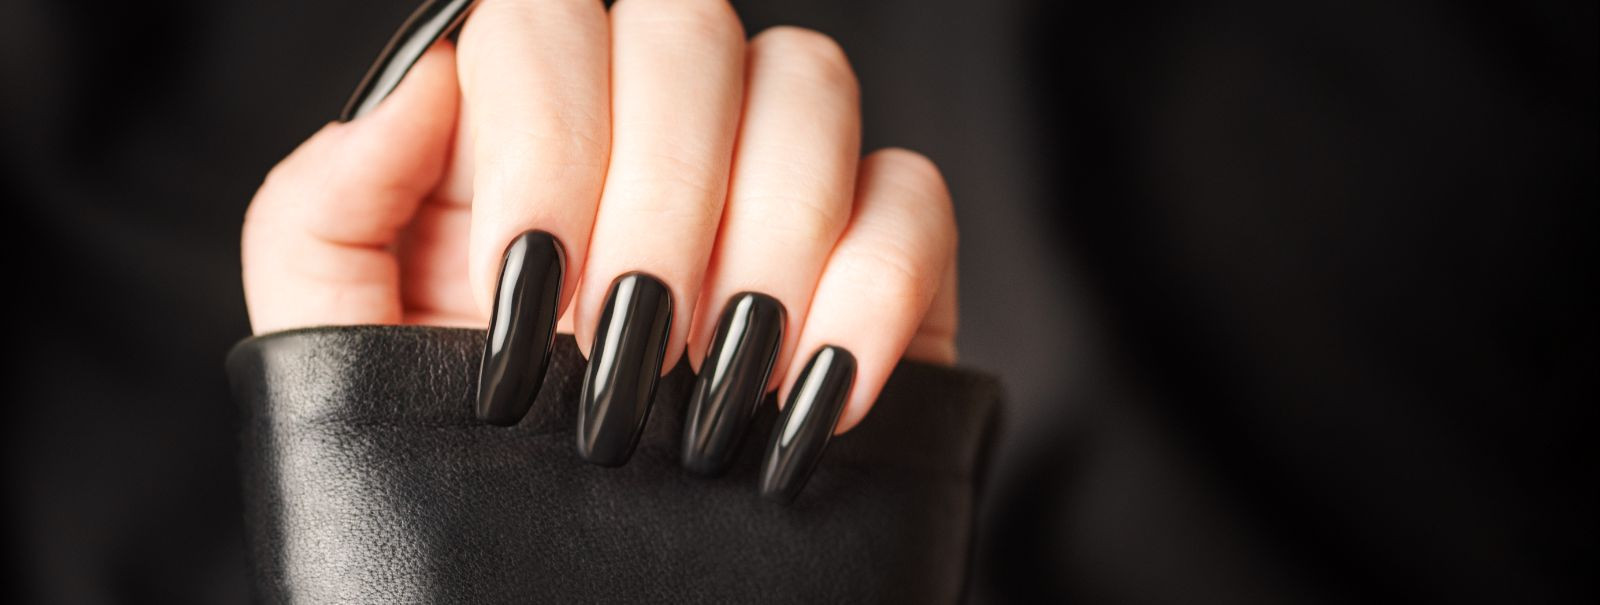 When it comes to nail care, a luxury manicure stands out from the standard service. It's not just about having your nails shaped and polished; it's an immersive